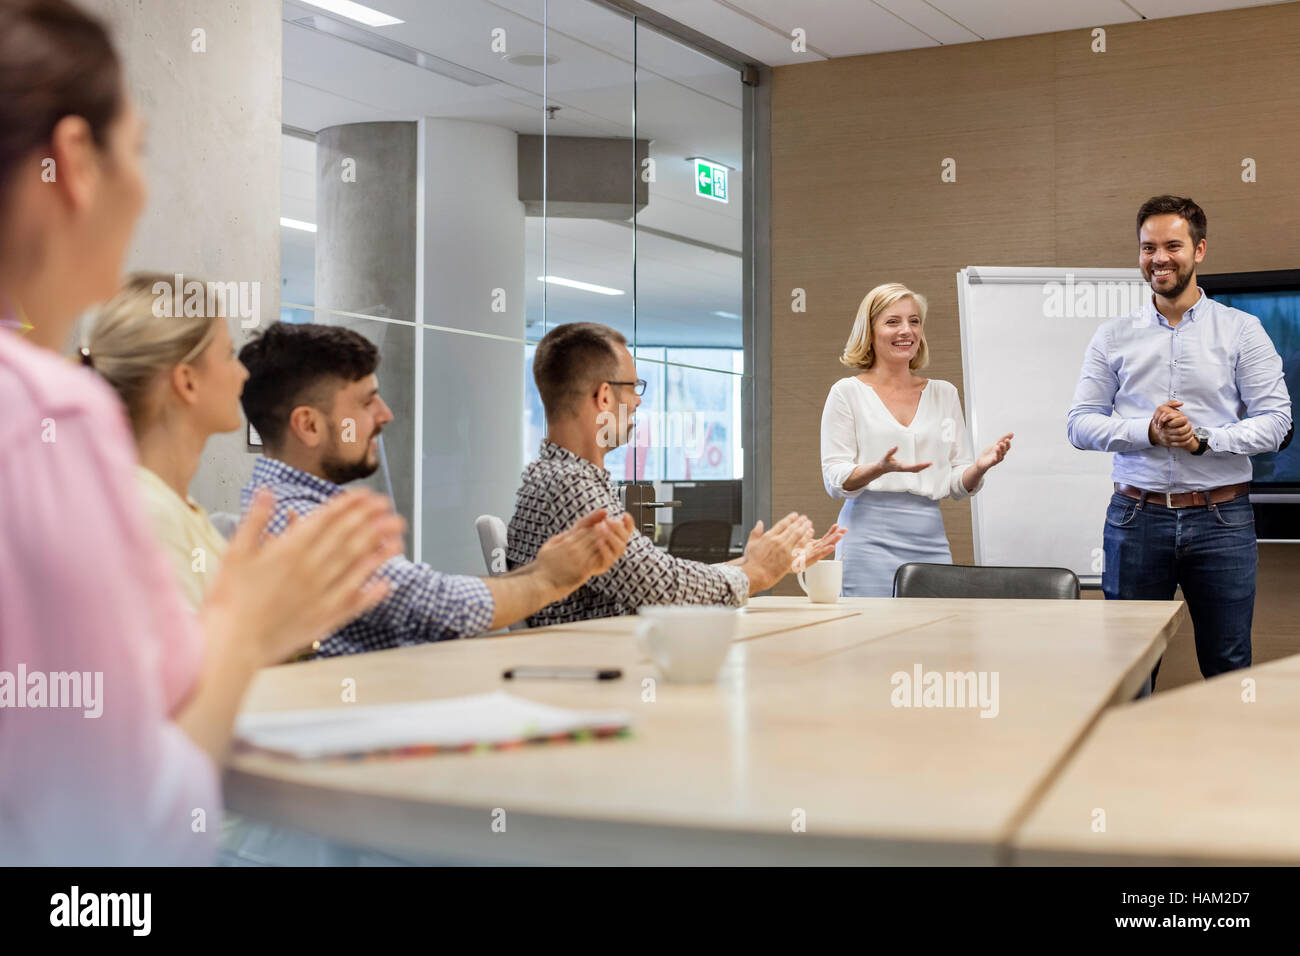 Business people clapping for businessman in conference room meeting Stock Photo